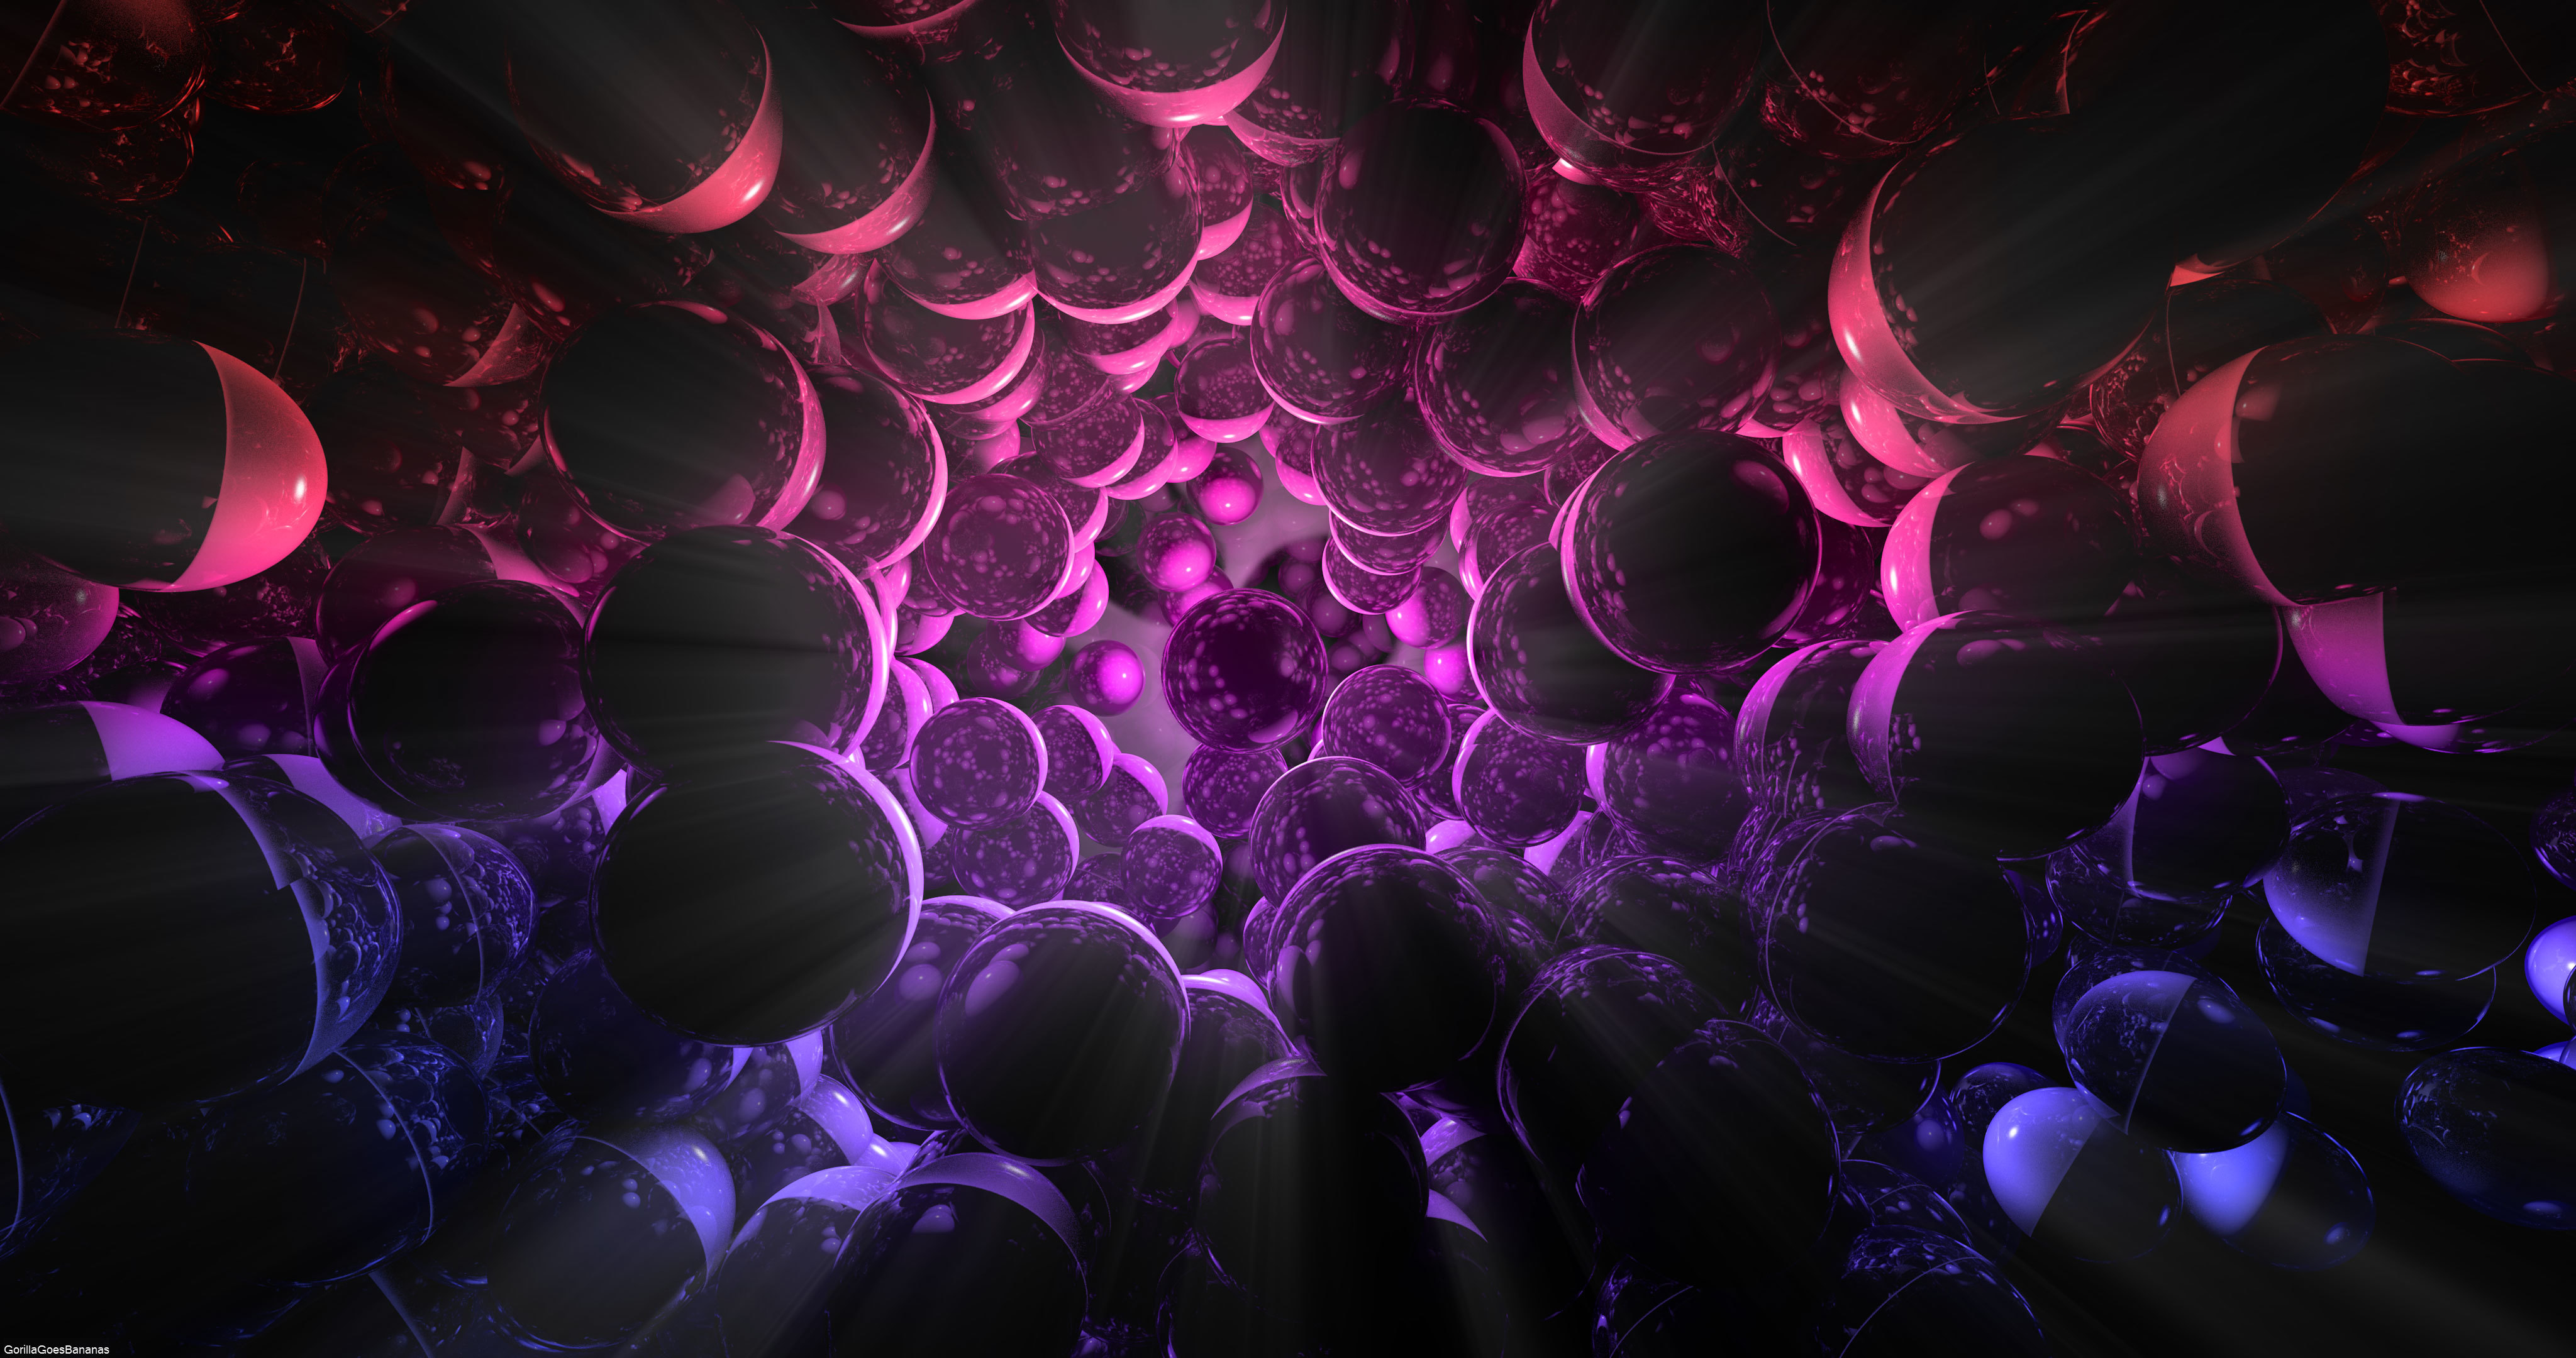 General 4096x2160 CGI 3D Abstract abstract ball sphere watermarked digital art